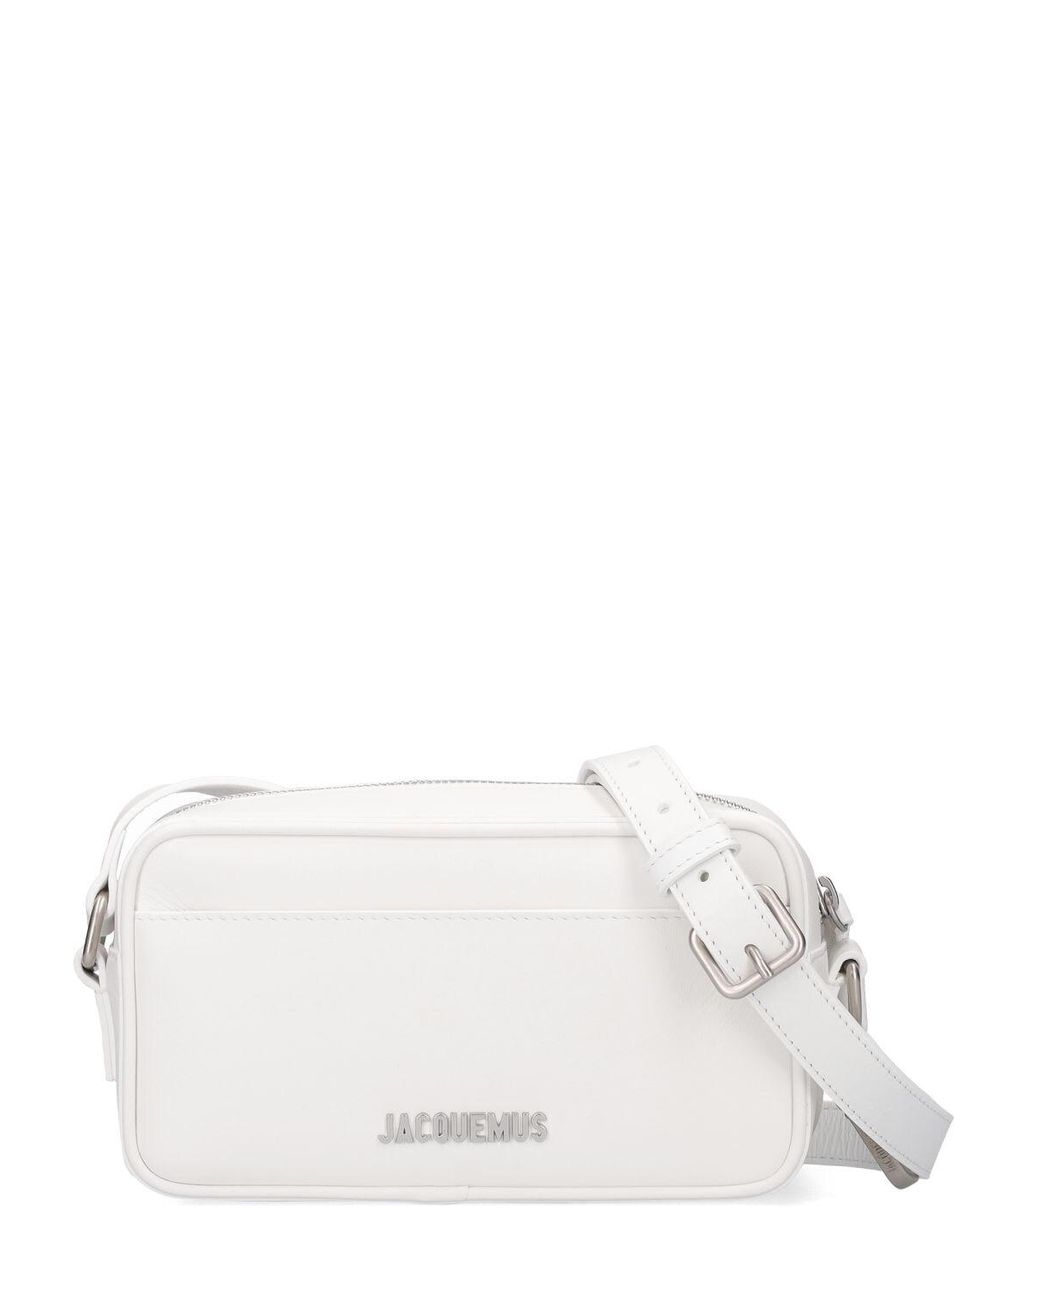 Jacquemus Le Baneto Leather Crossbody Bag in White for Men | Lyst